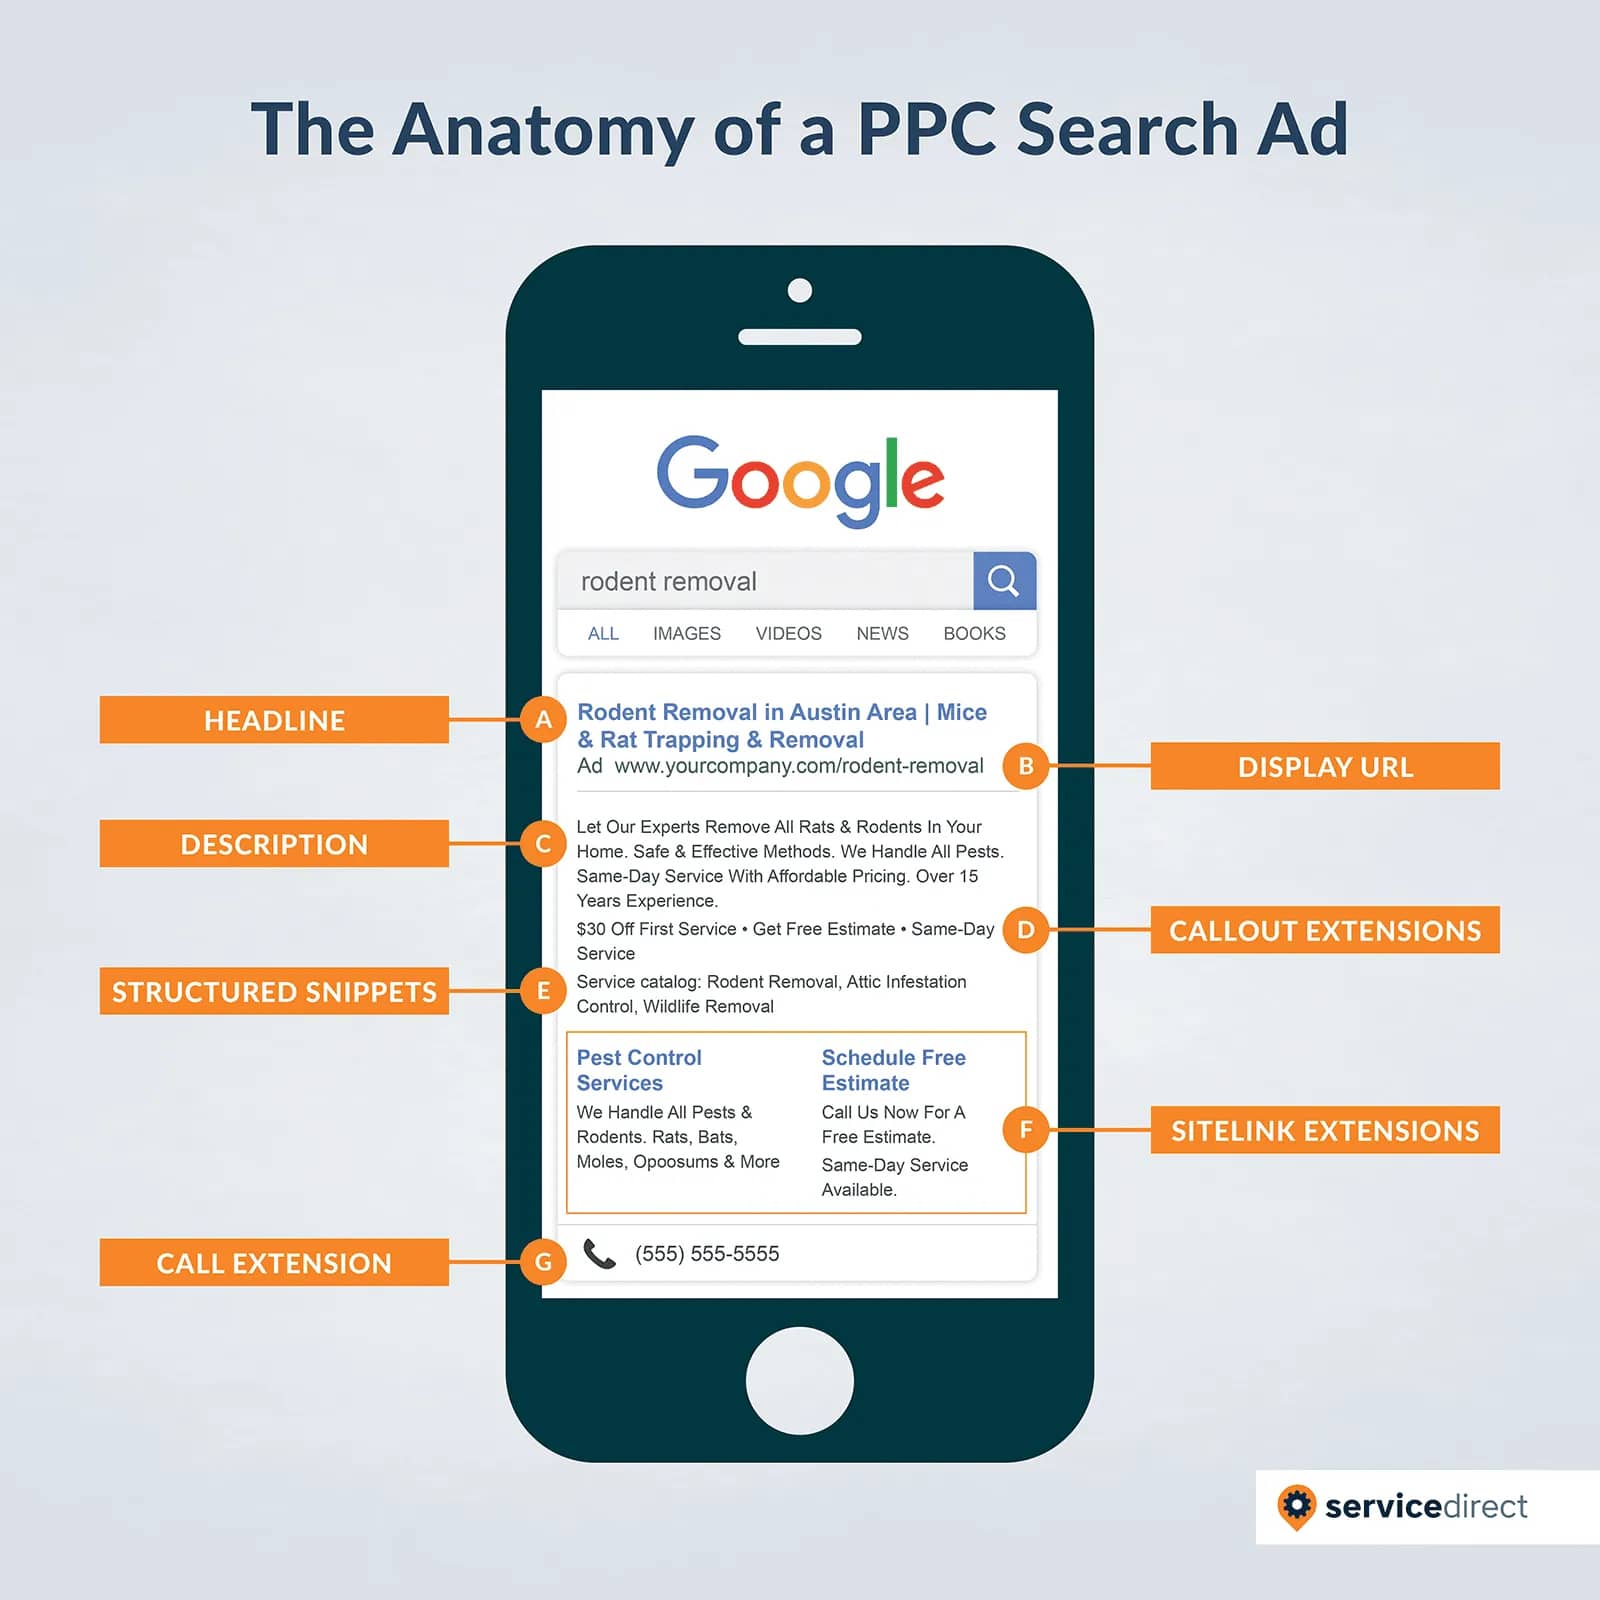 Anatomy of a PPC Search Ad